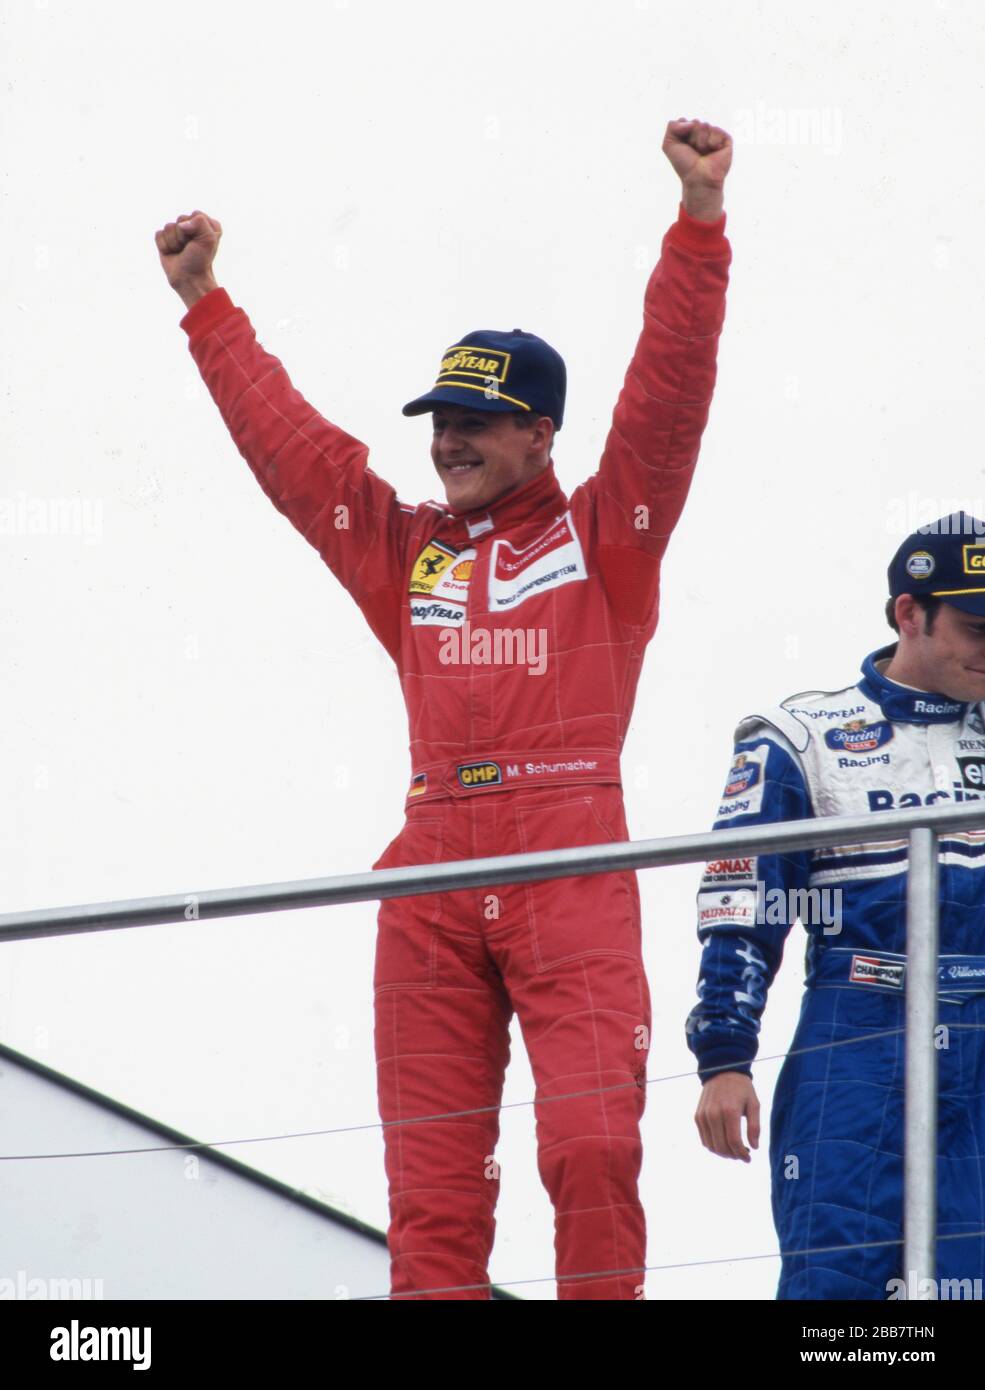 firo: Formula 1, season 1996 Sport, Motorsport, Formula 1, archive, archive pictures Team Ferrari (1996-2006) Michael Schumacher, Germany, was a Formula 1 driver from 1991 to 2006 and 2010 to 2012, Schumacher was 7, seven times, Formula 1, world champion, German national hero, brought Formula 1 after Germany, one of the largest Germans, 1st season at Ferrari Michael Schumacher, half figure, jubilation, cheering, gesture | usage worldwide Stock Photo